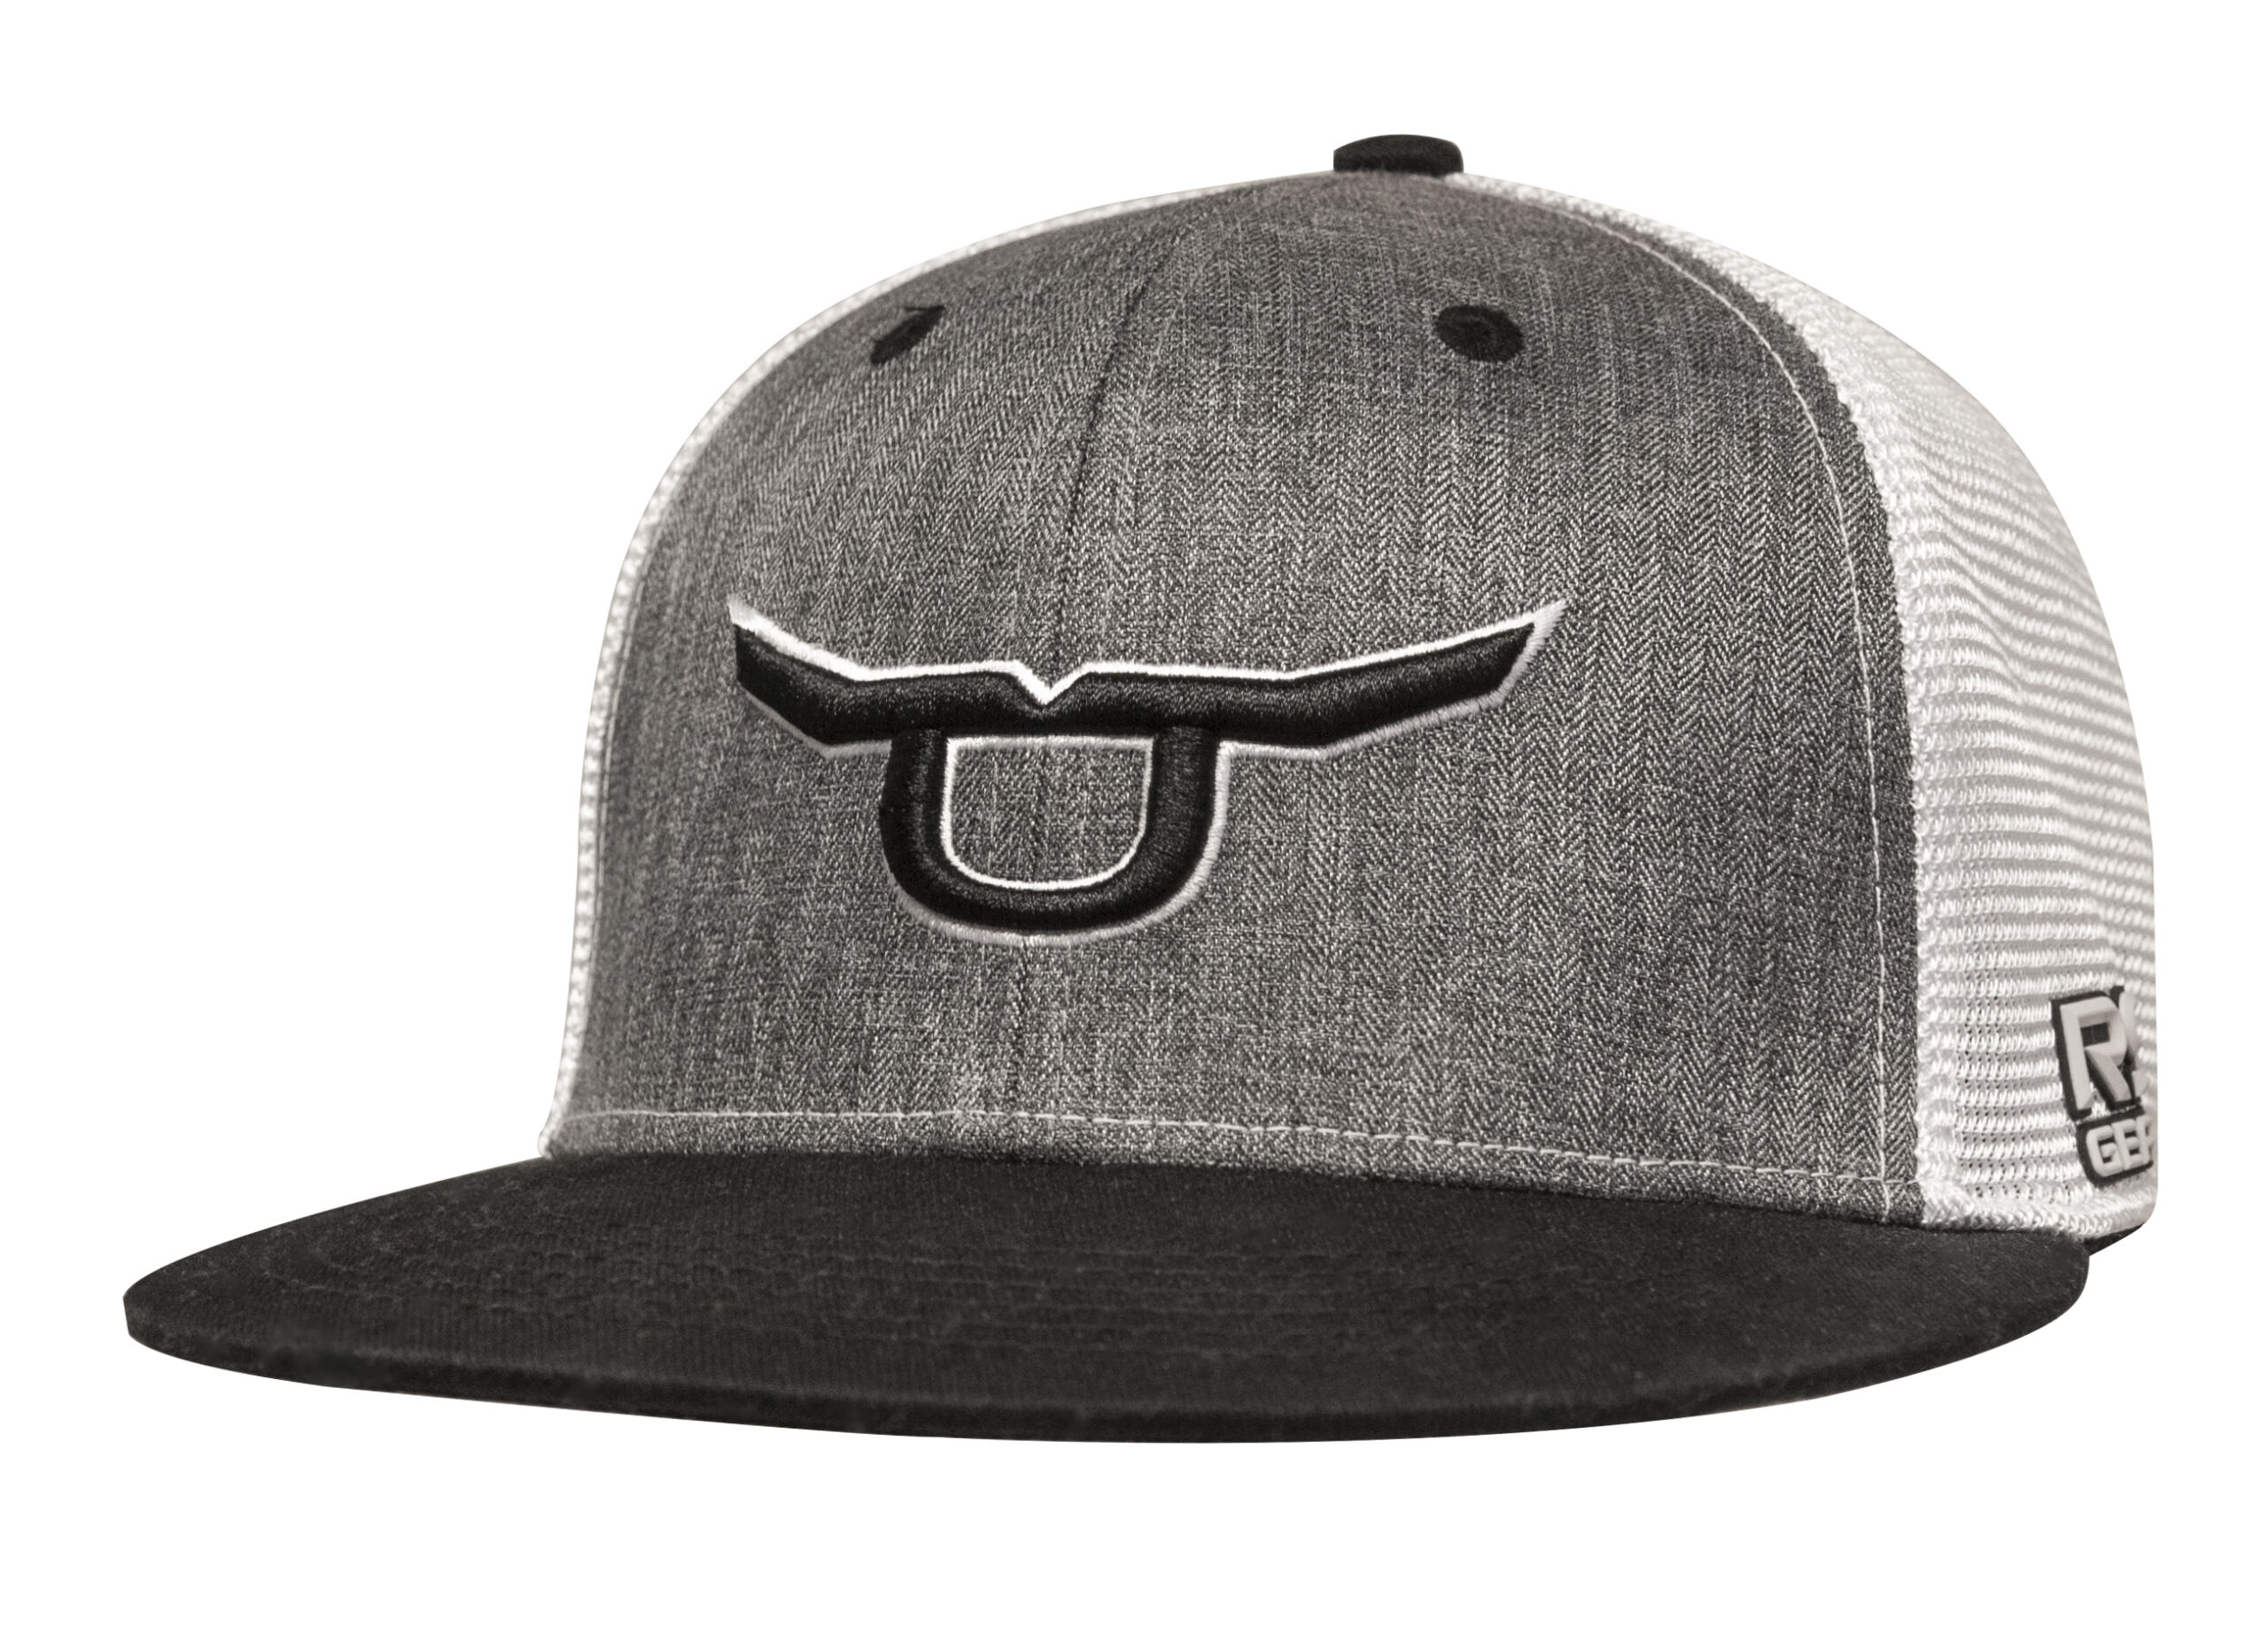 RS Tuff Steer Fitted Cap